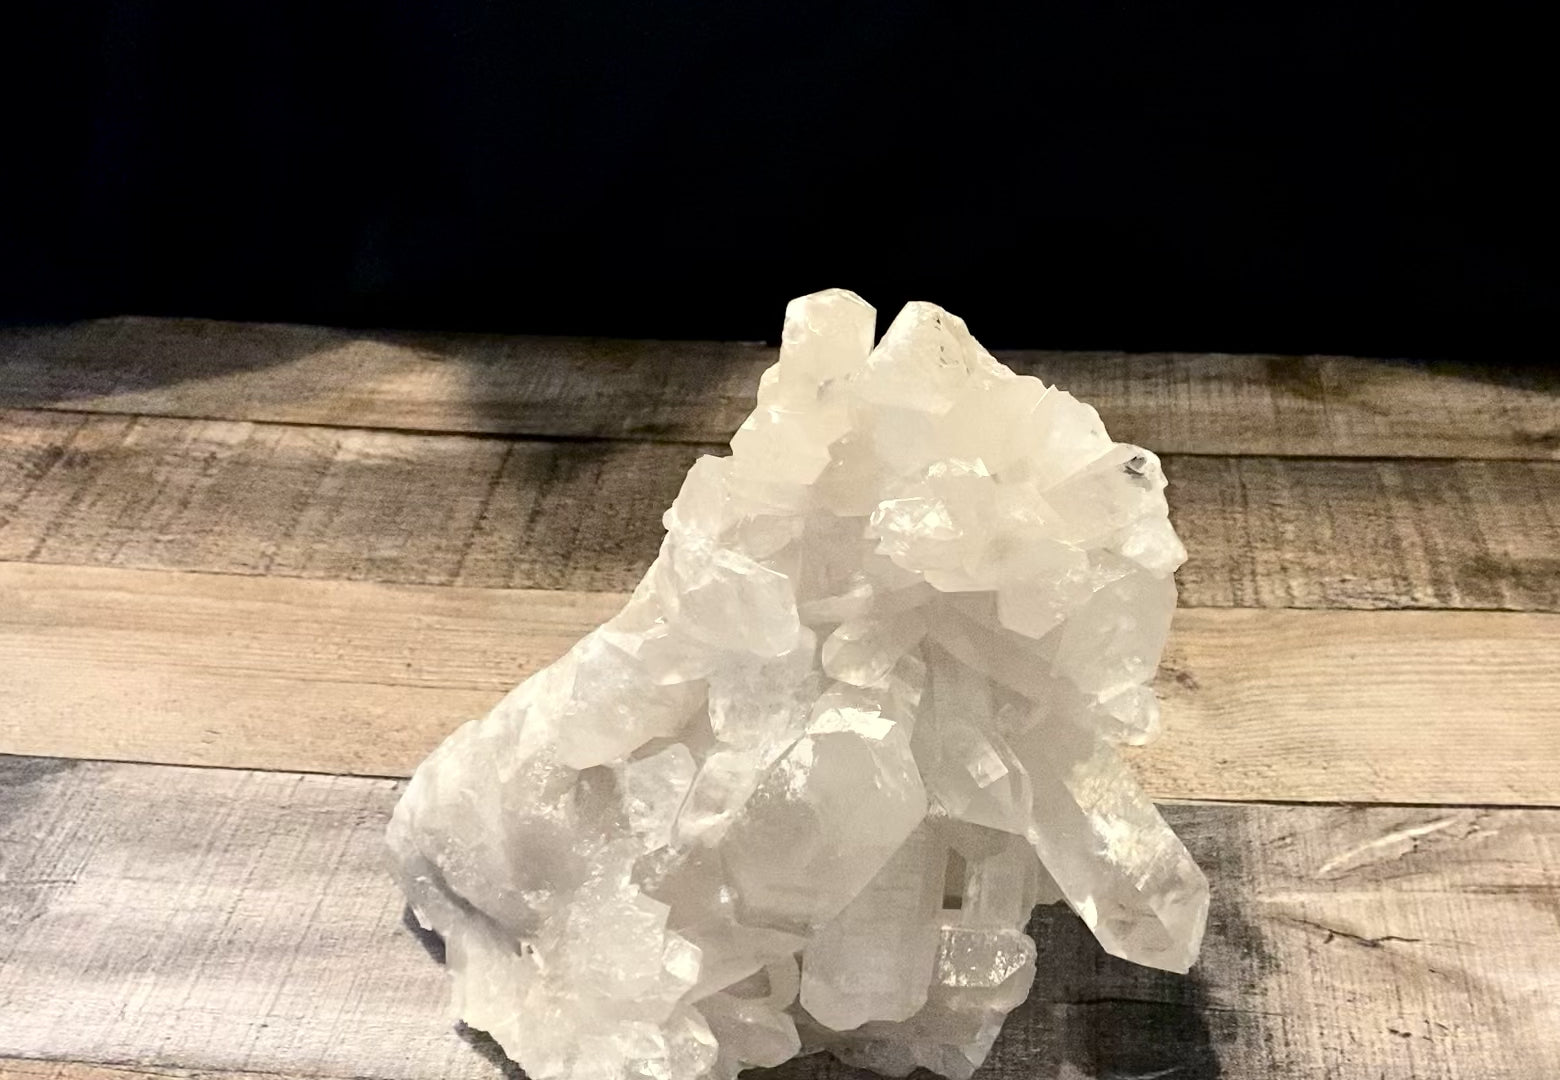 Extra large, stunning Brazilian quartz cluster that is 7.5" wide and 7.5" tall, weighing just over 5 lb. - Video